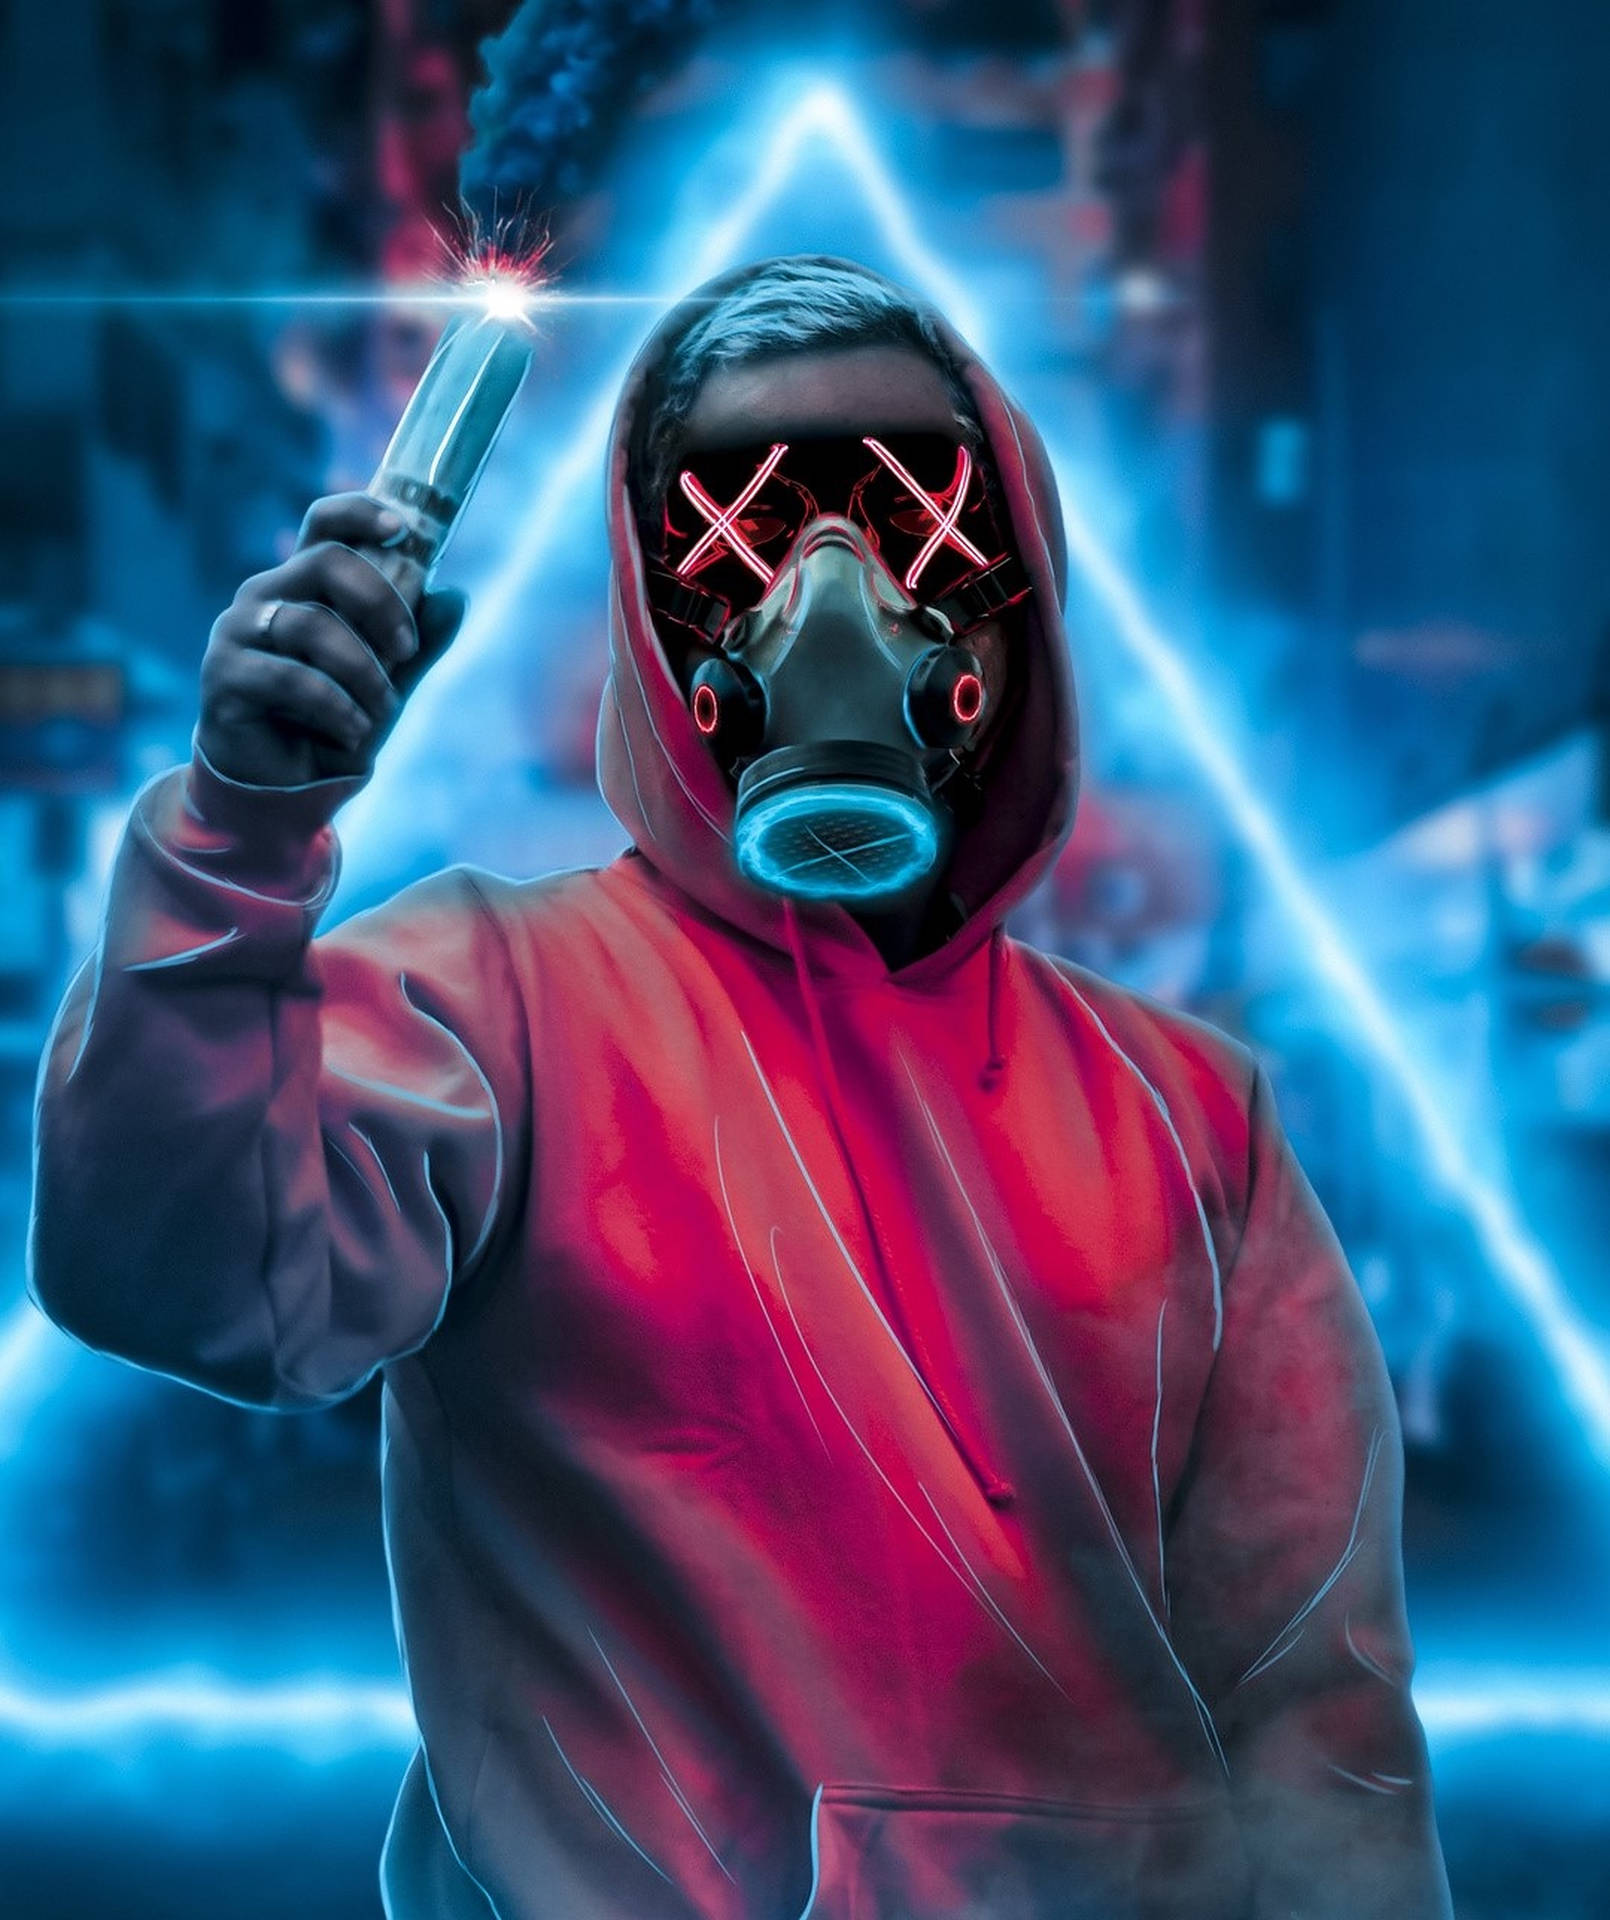 Cool Profile Pictures Neon Masked Man Wallpaper